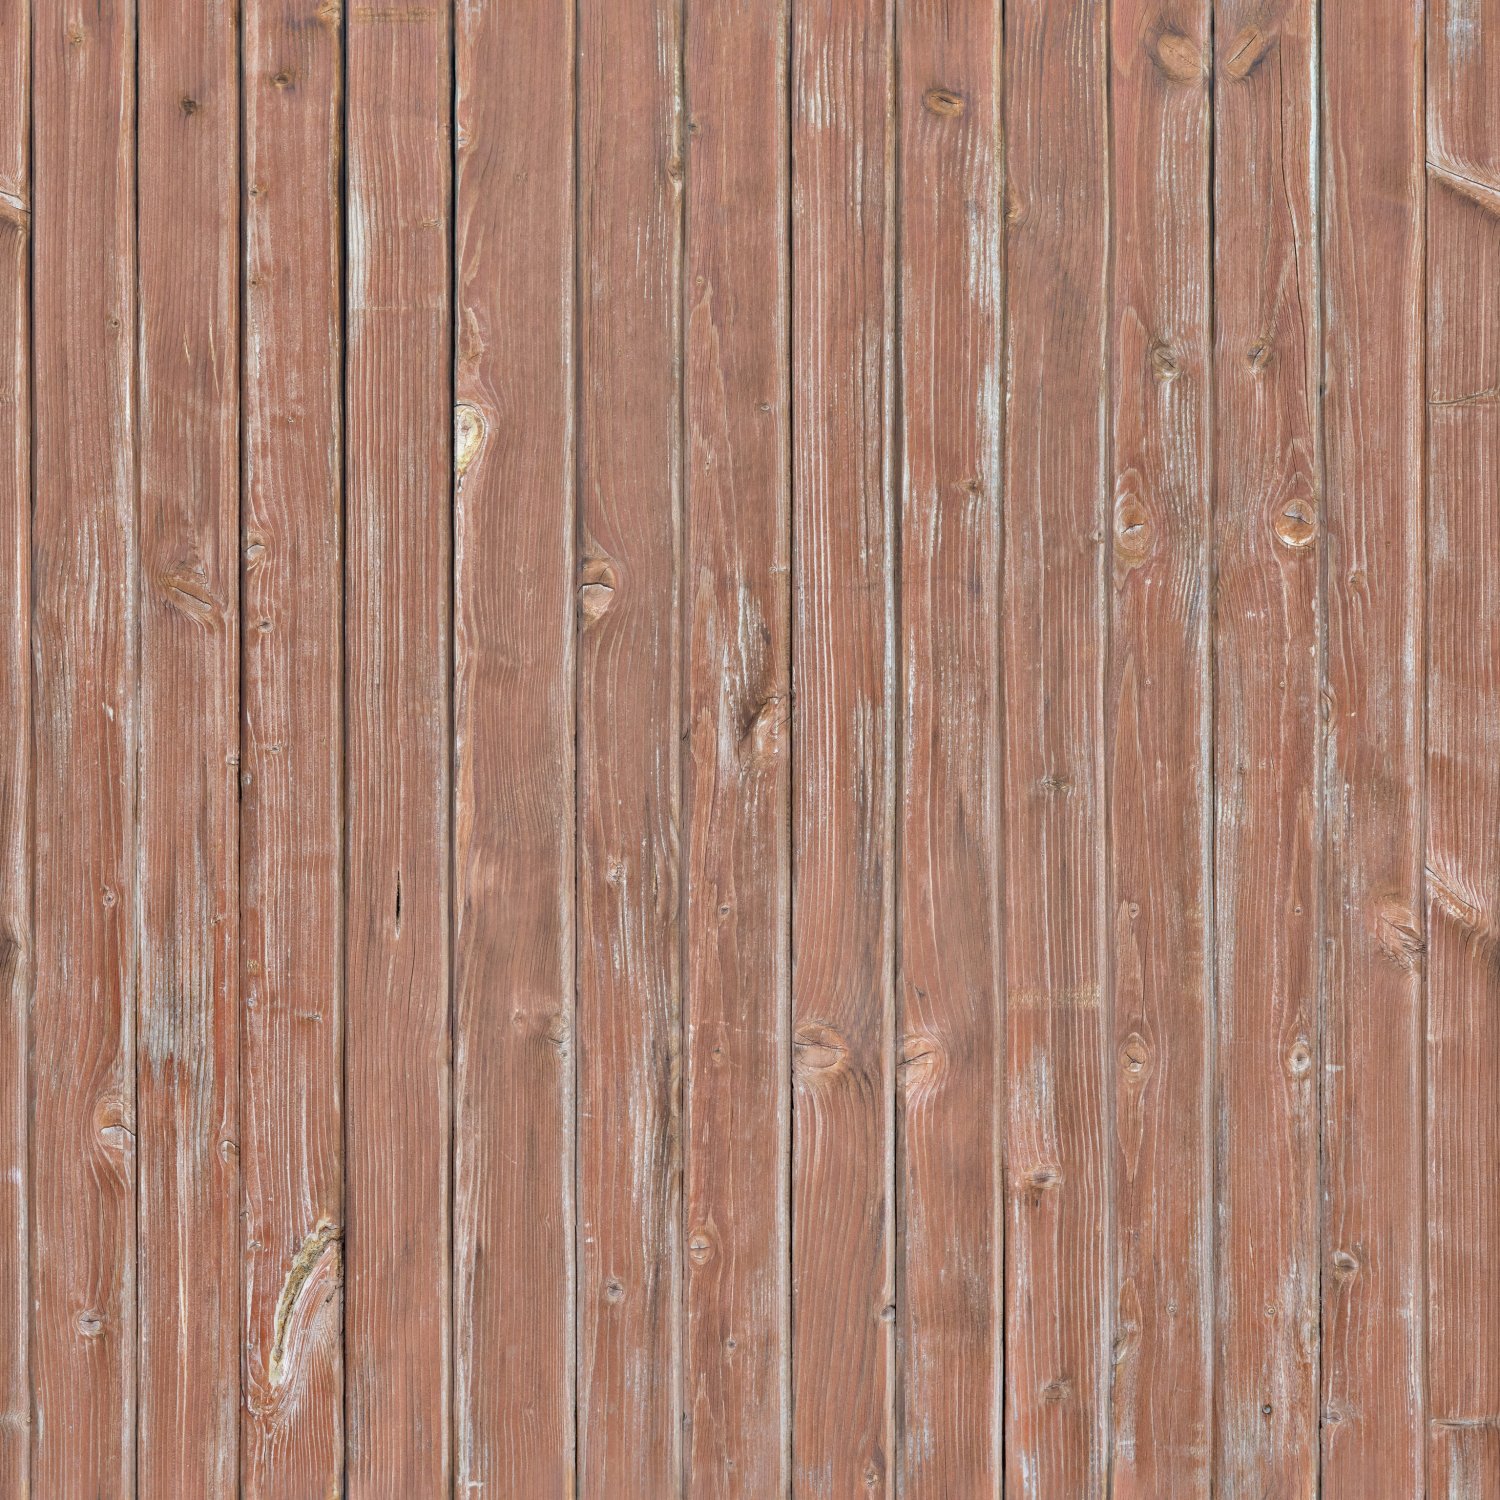 26 high resolution 3k architectural wood planks seamless textures